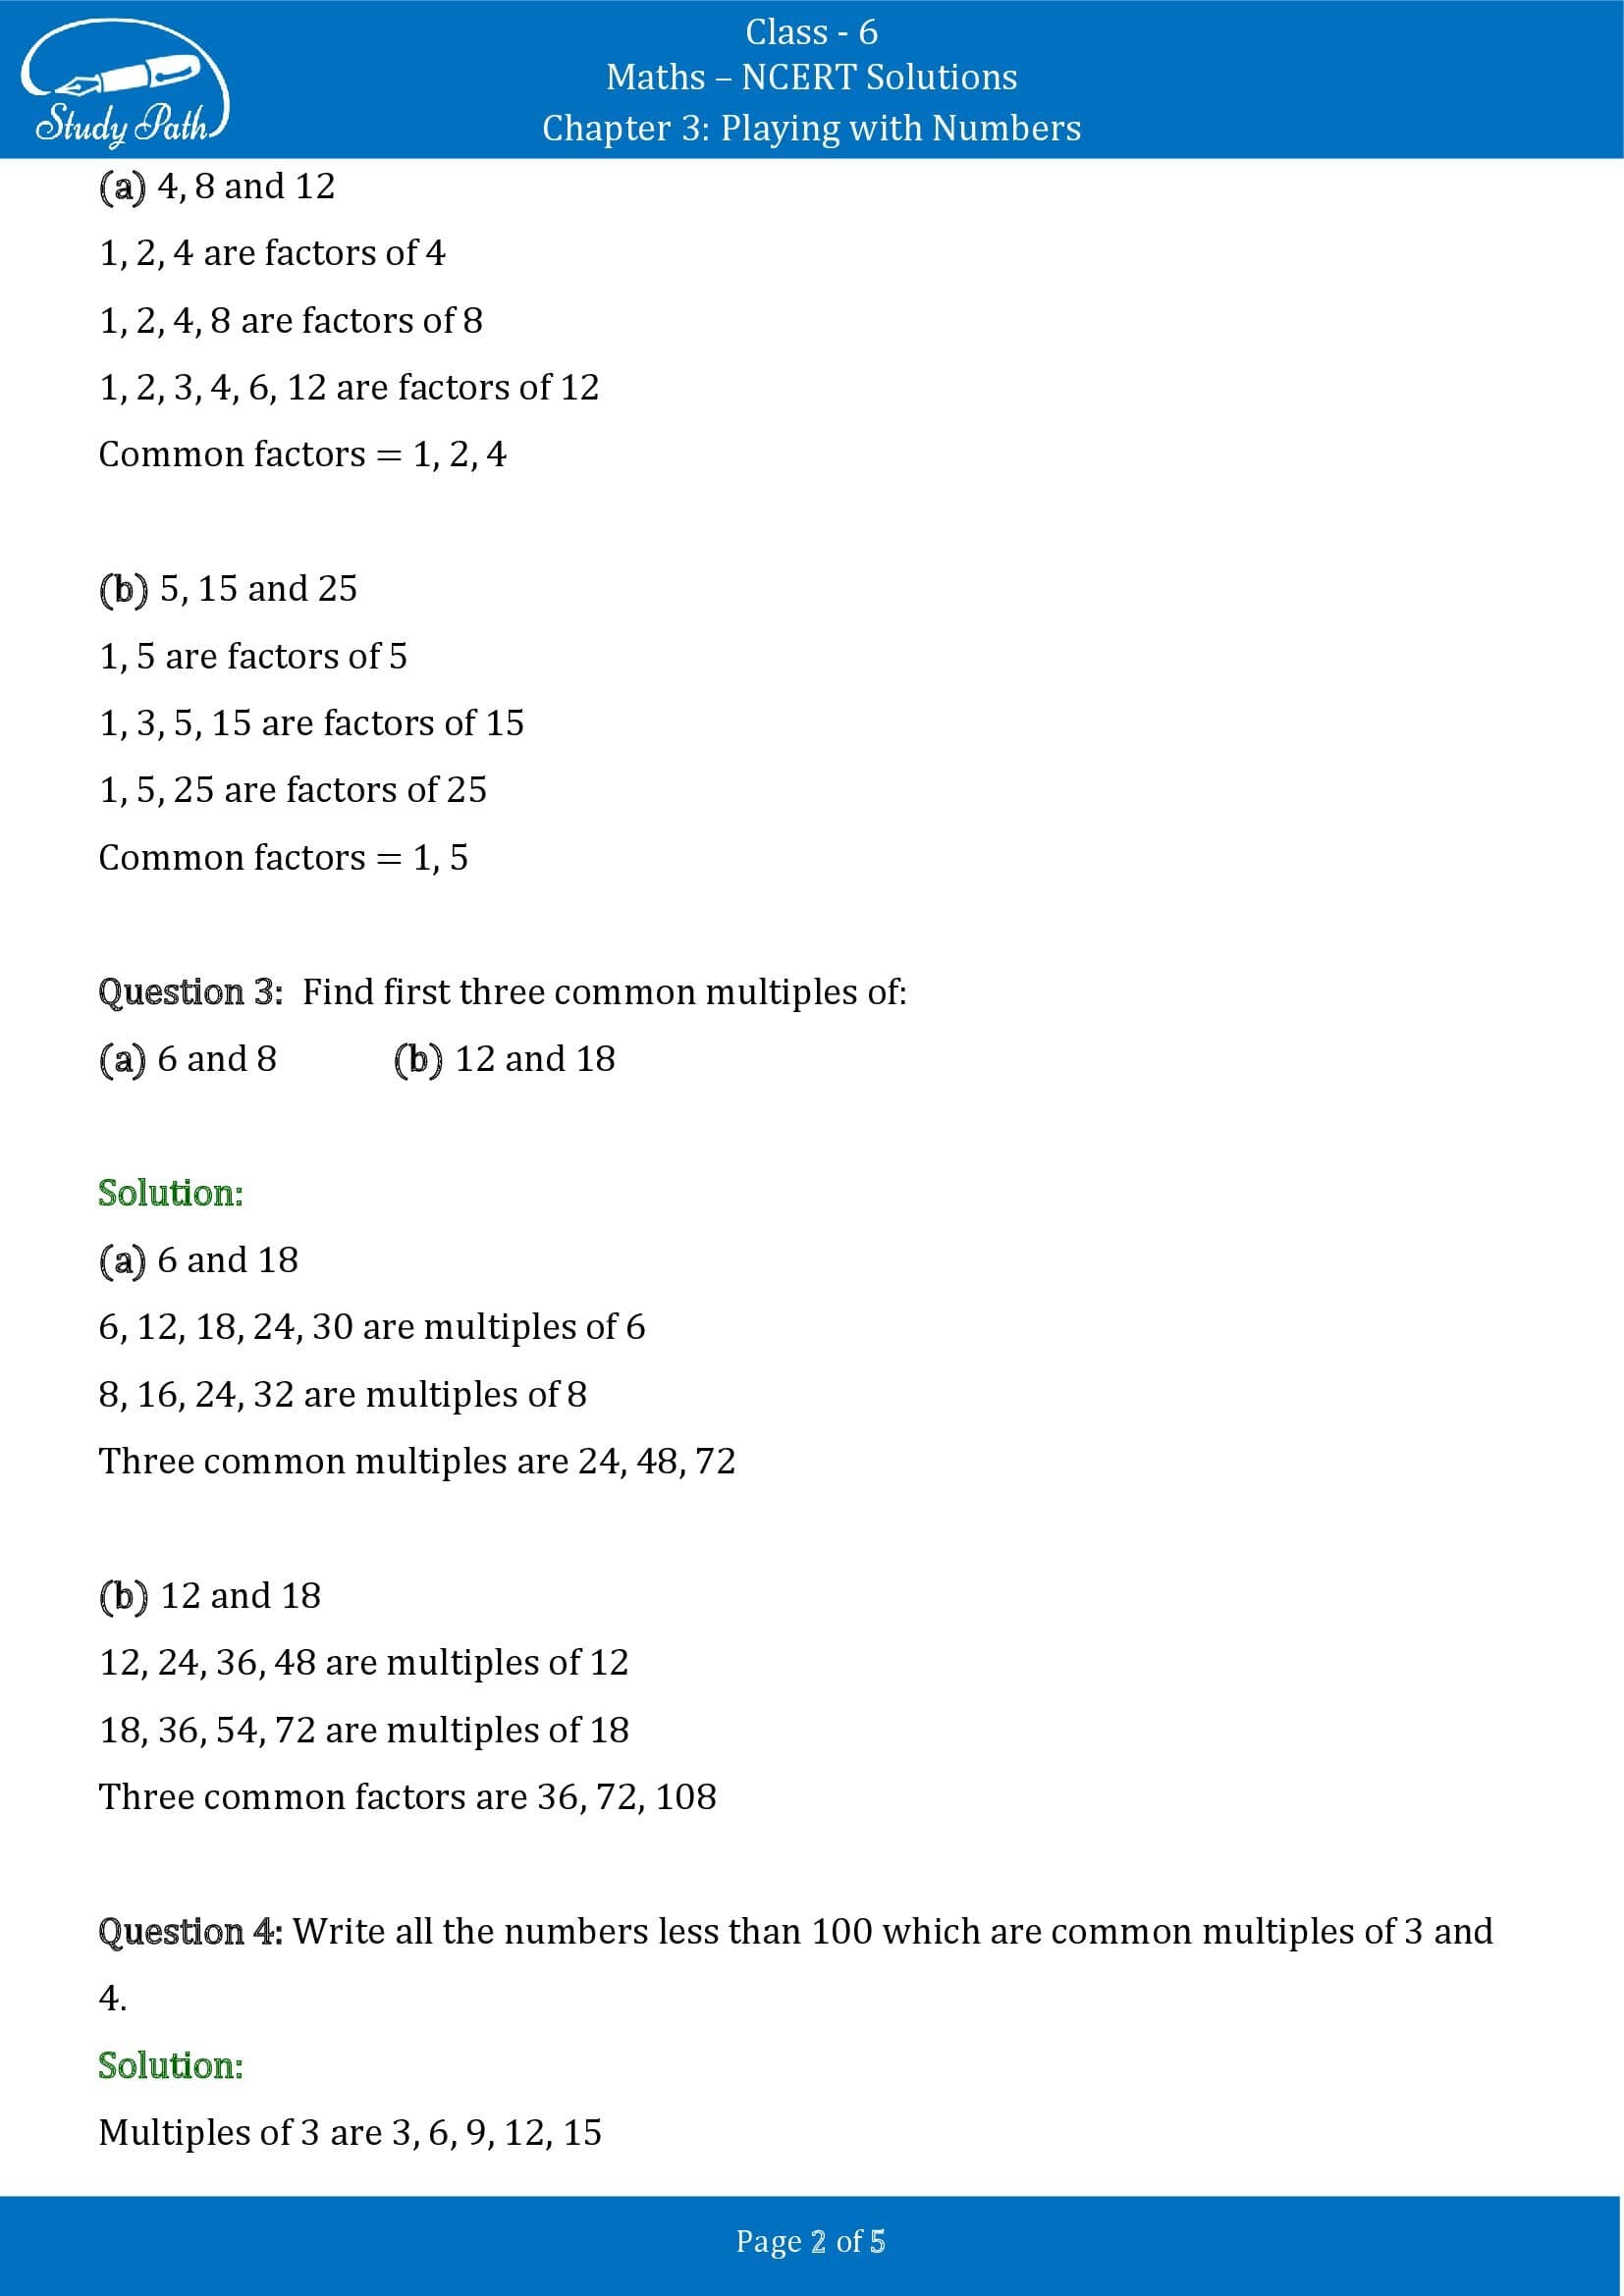 NCERT Solutions for Class 6 Maths Chapter 3 Playing with Numbers Exercise 3.4 00002